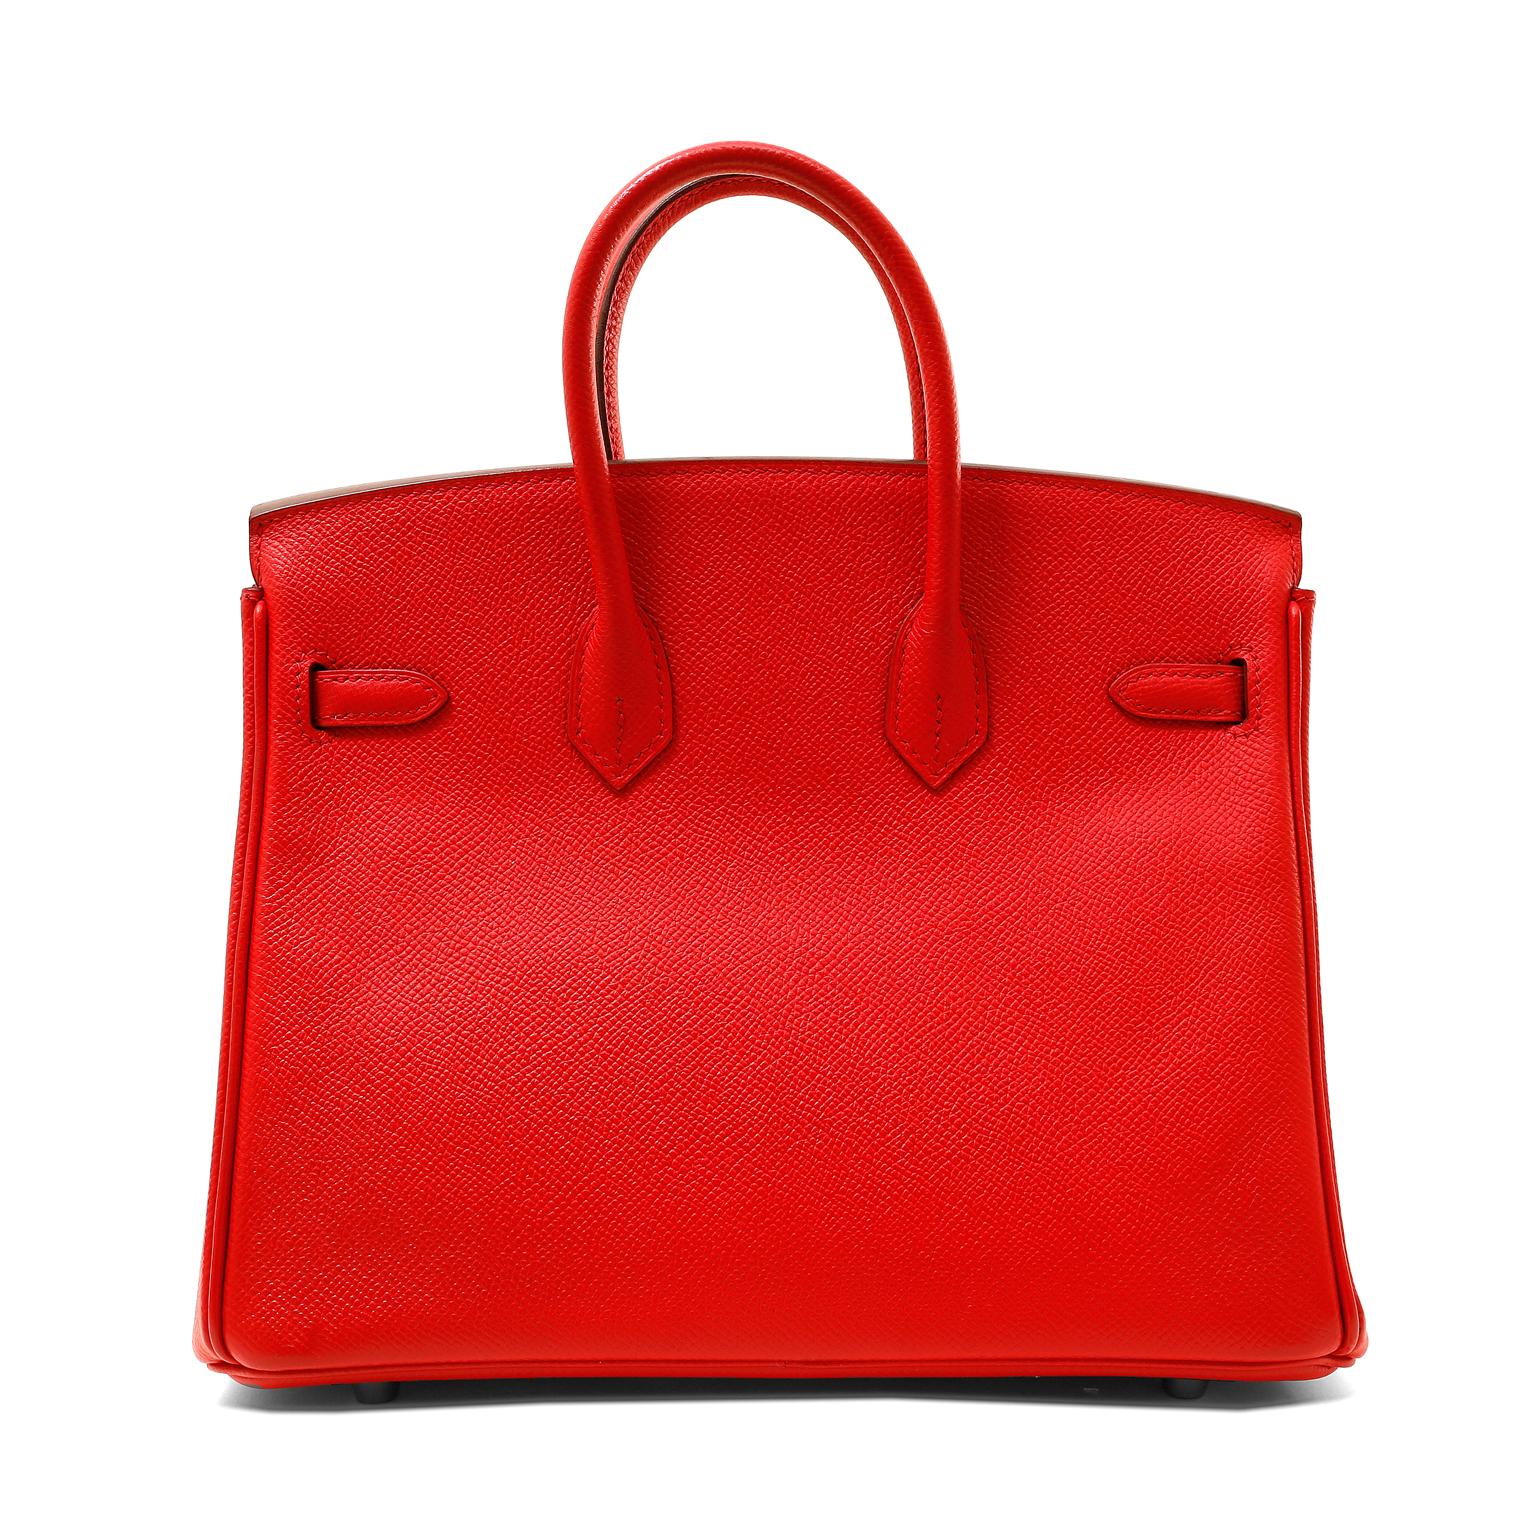 This authentic Hermès Poppy Red Epsom Leather 25 cm Birkin is in pristine condition.  A sensational shade of head turning lipstick red, it is perfectly paired with bright Palladium hardware.  
Epsom leather is textured and lightweight, known for